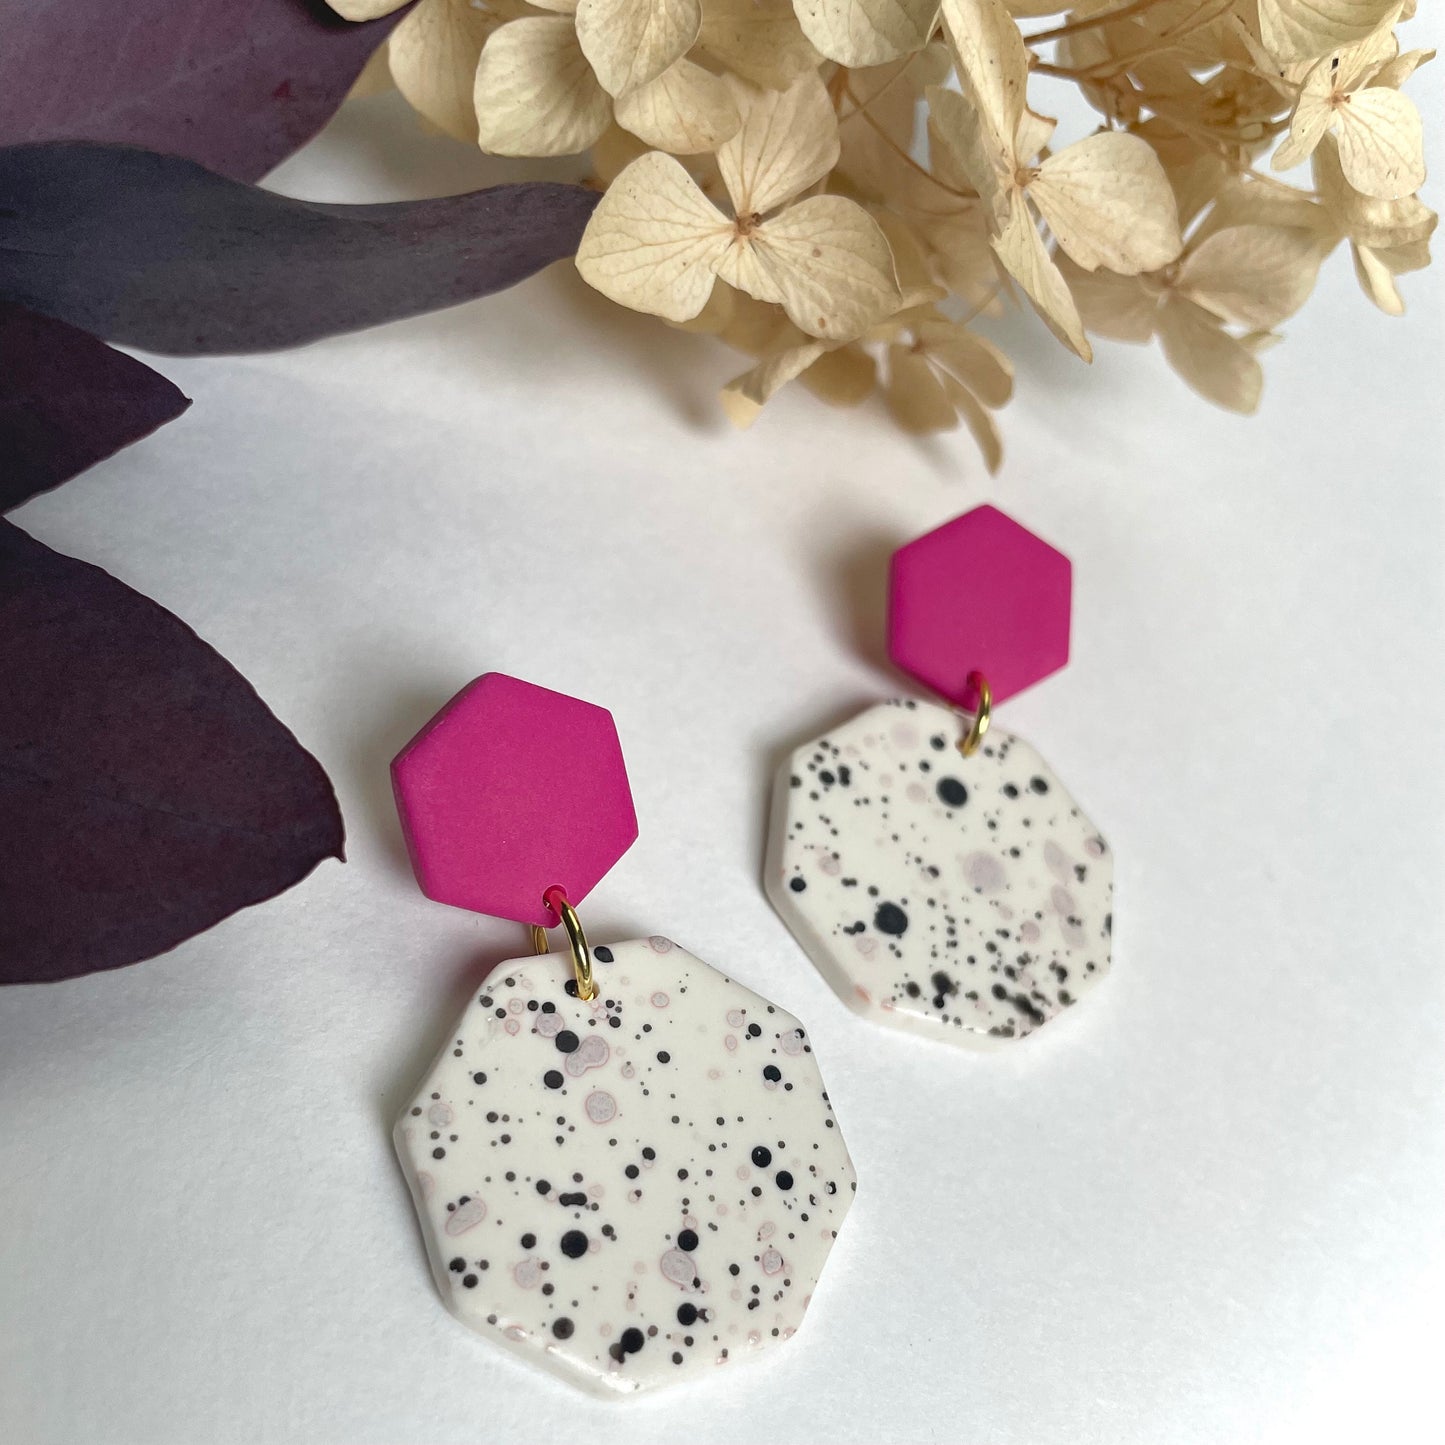 Spill Statement Earrings - Pink and Black